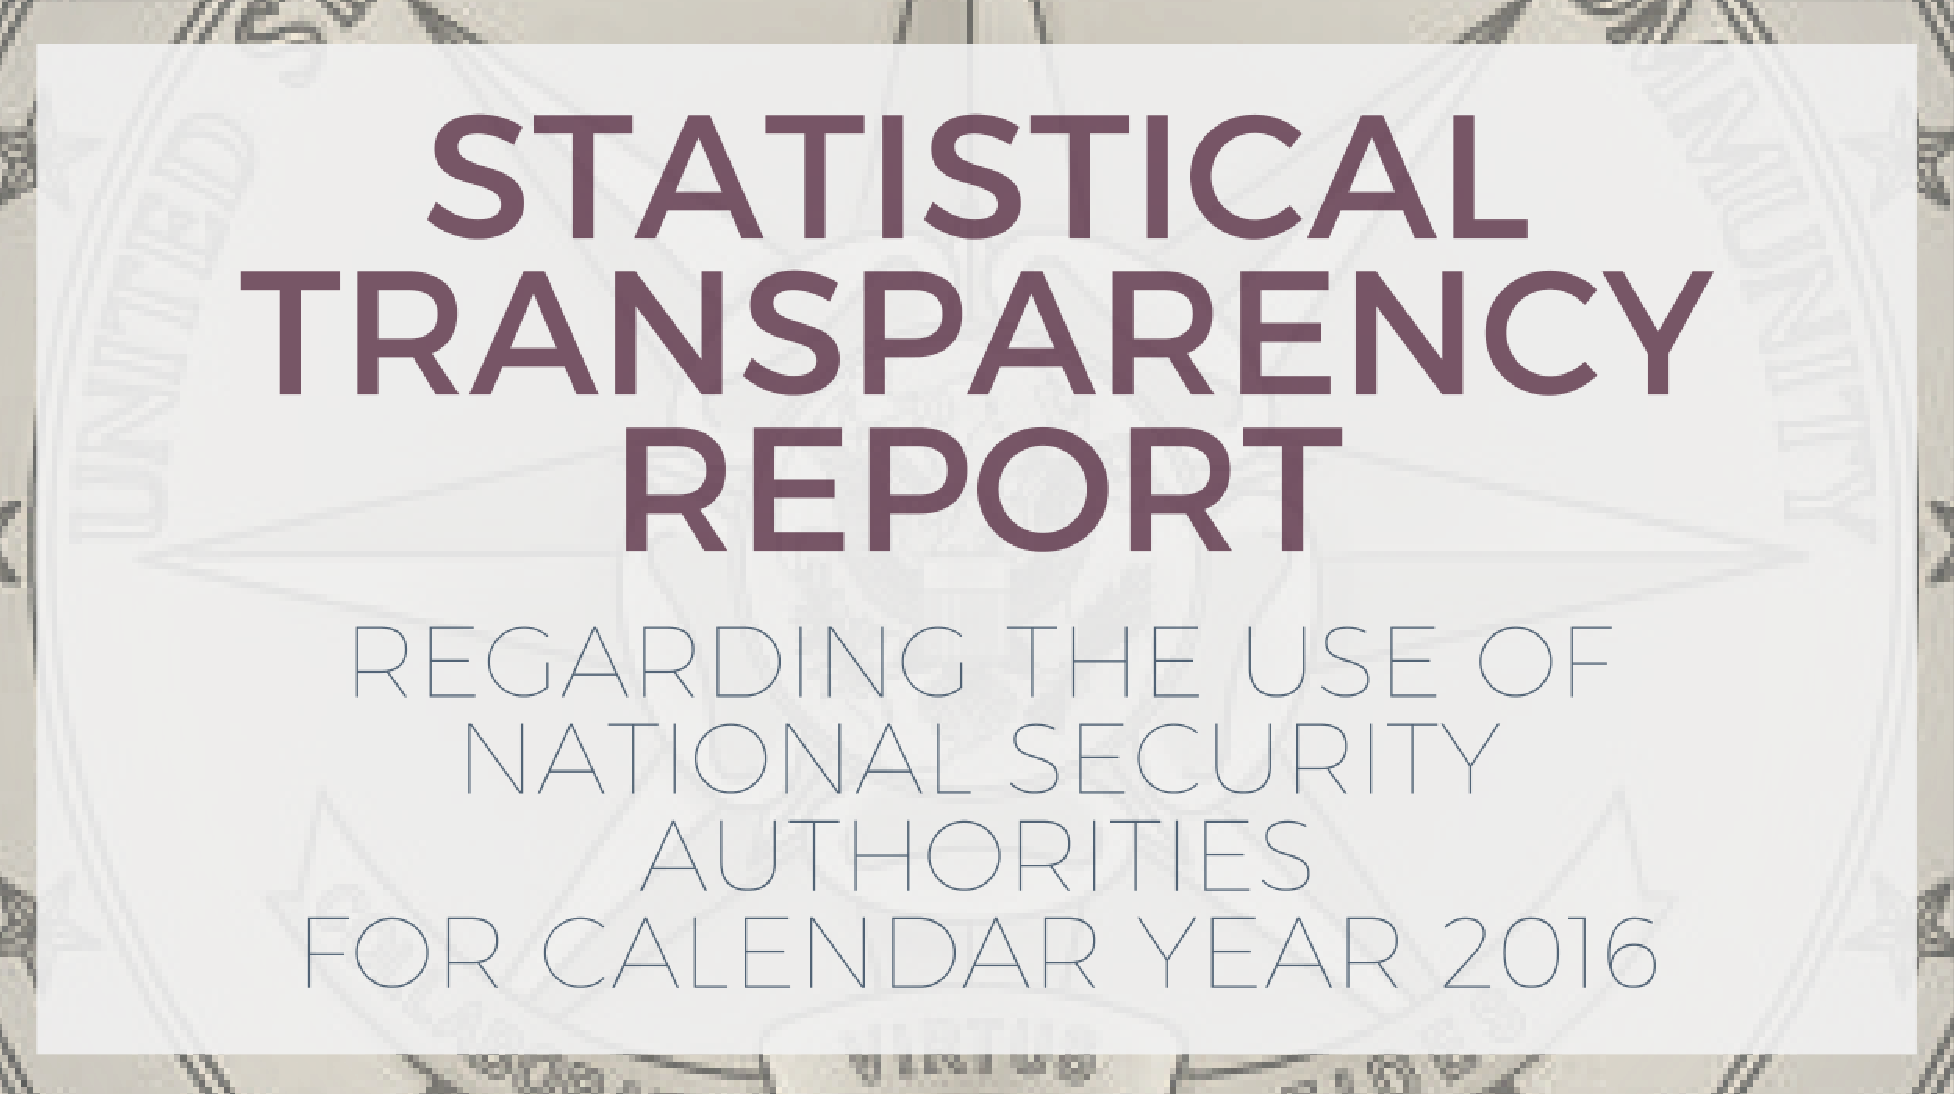 Statistical Transparency Report
Regarding the Use of
National Security Authorities
for Calendar Year 2016
April 2017